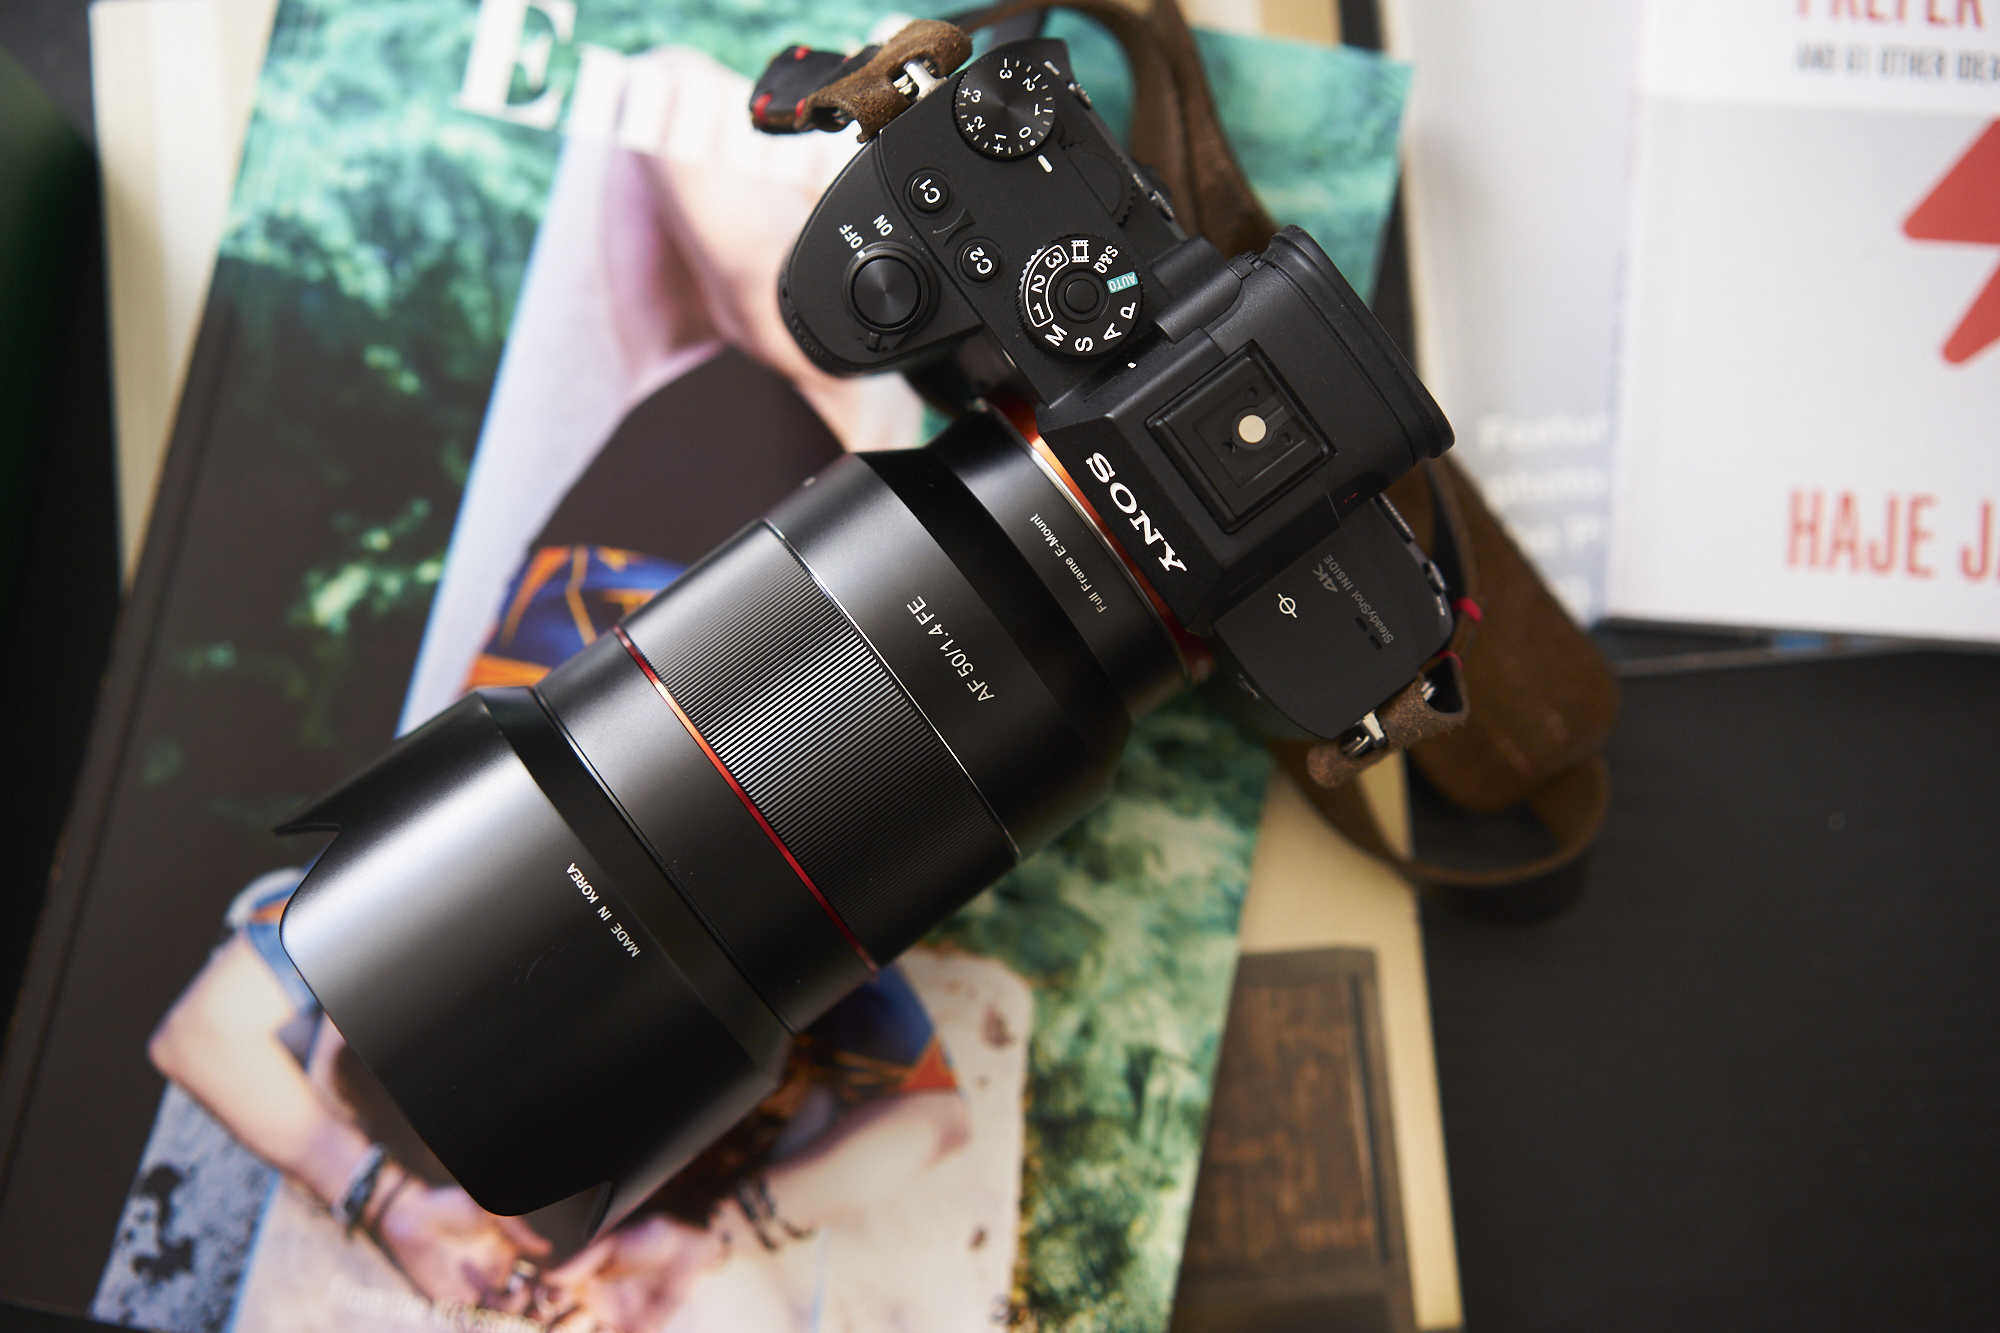 Deal Alert: Save $300 On Rokinon’s Excellent 35mm F1.4 and More